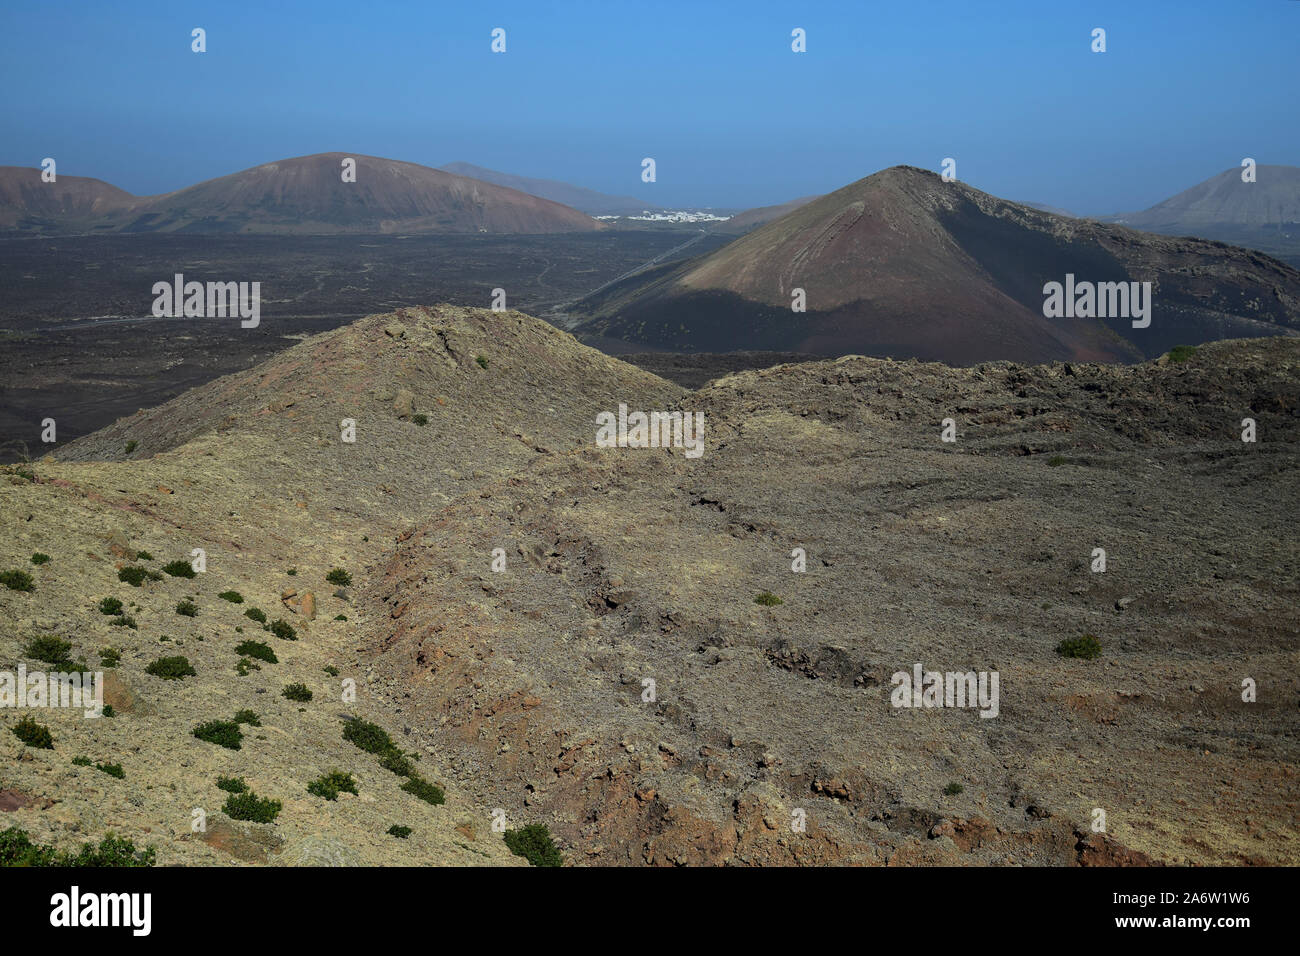 A barren volcano landscape in Lanzarote, Spain. In the distance are the white houses of Mancha Blanca. Stock Photo